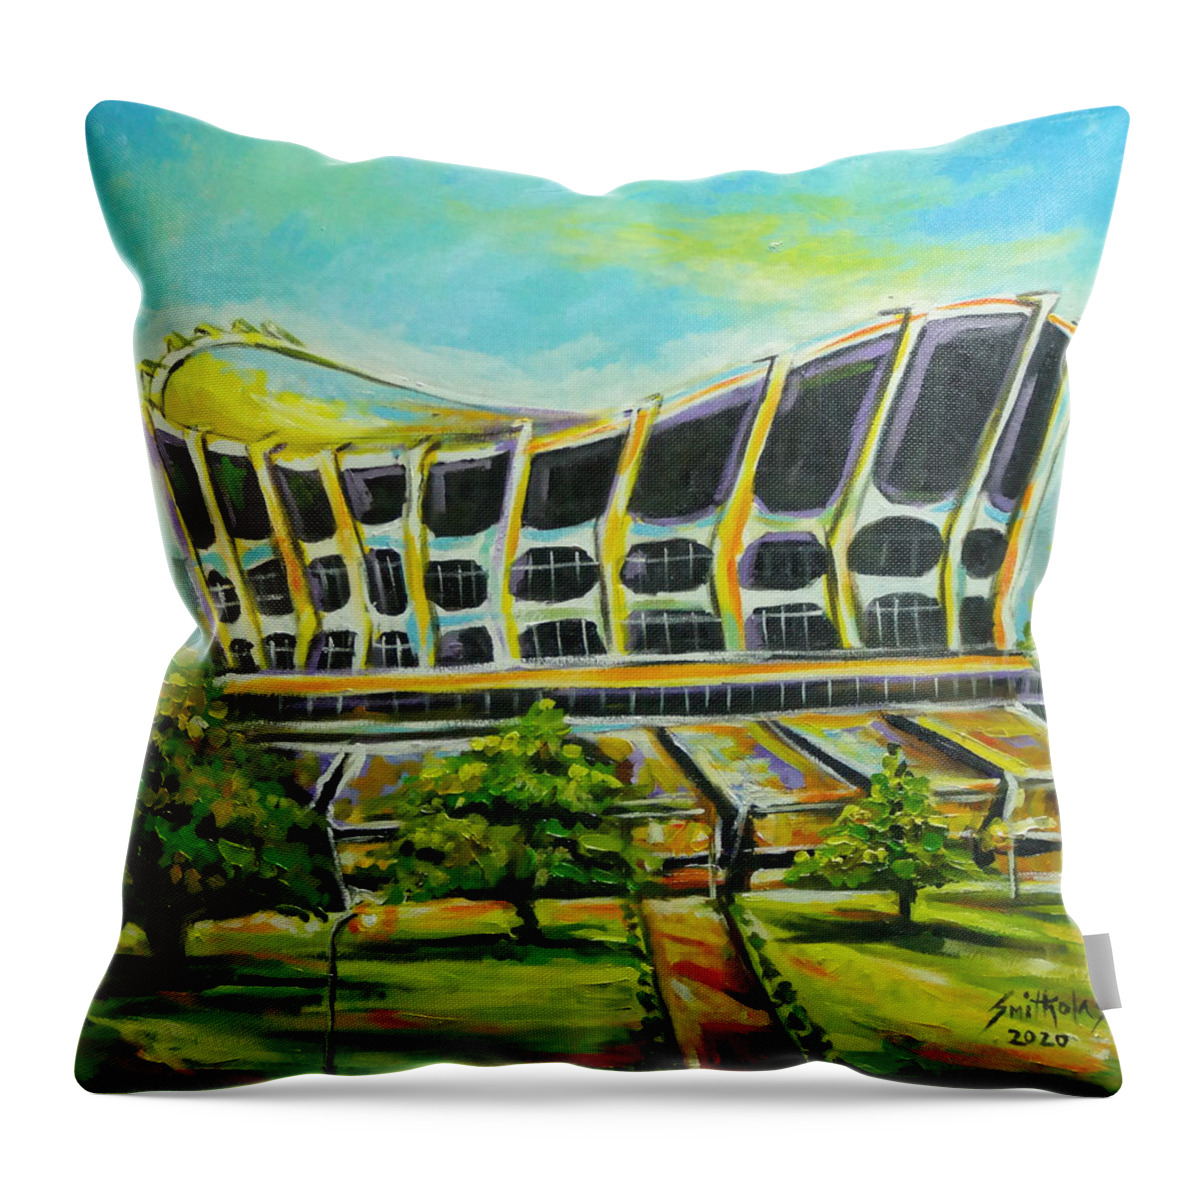 Living Room Throw Pillow featuring the painting National Theatre Nigeria by Olaoluwa Smith